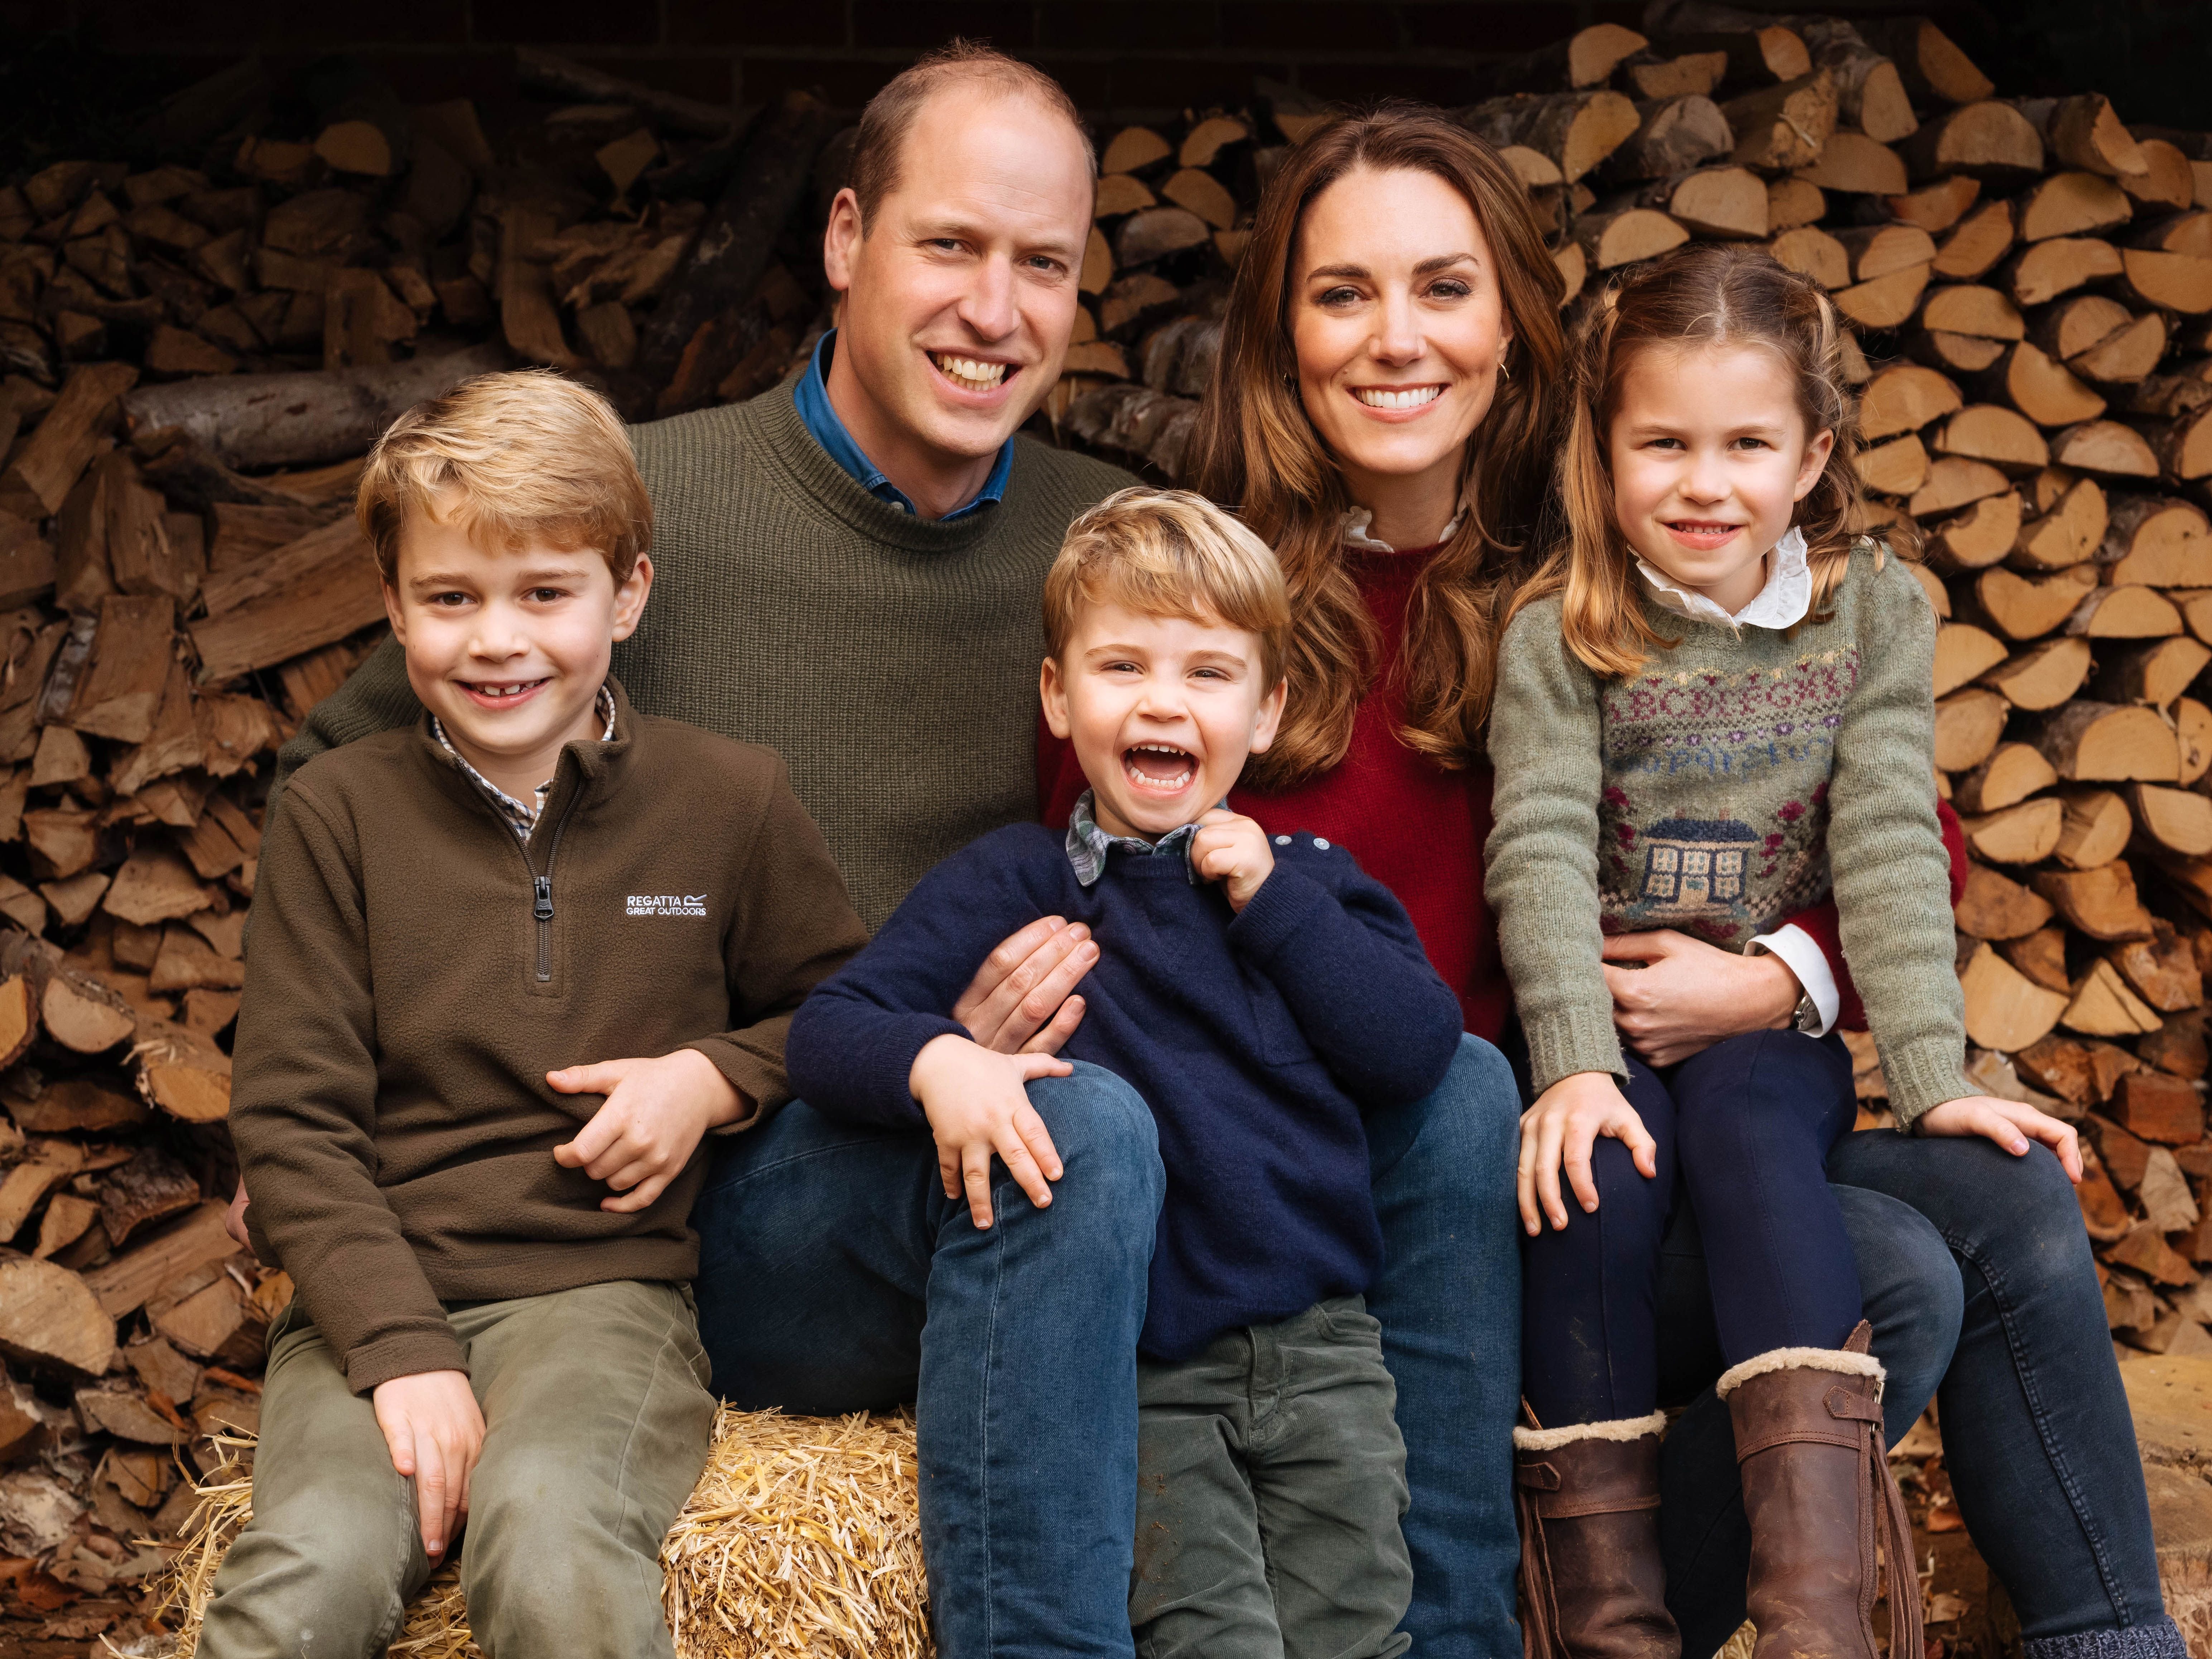 Prince William, Duke of Cambridge and Kate Middleton, Duchess of Cambridge with their three children Prince George, Princess Charlotte and Prince Louis at Anmer Hall in Norfolk | Photo: Matt Porteous / The Duke and Duchess of Cambridge/Kensington Palace via Getty Images